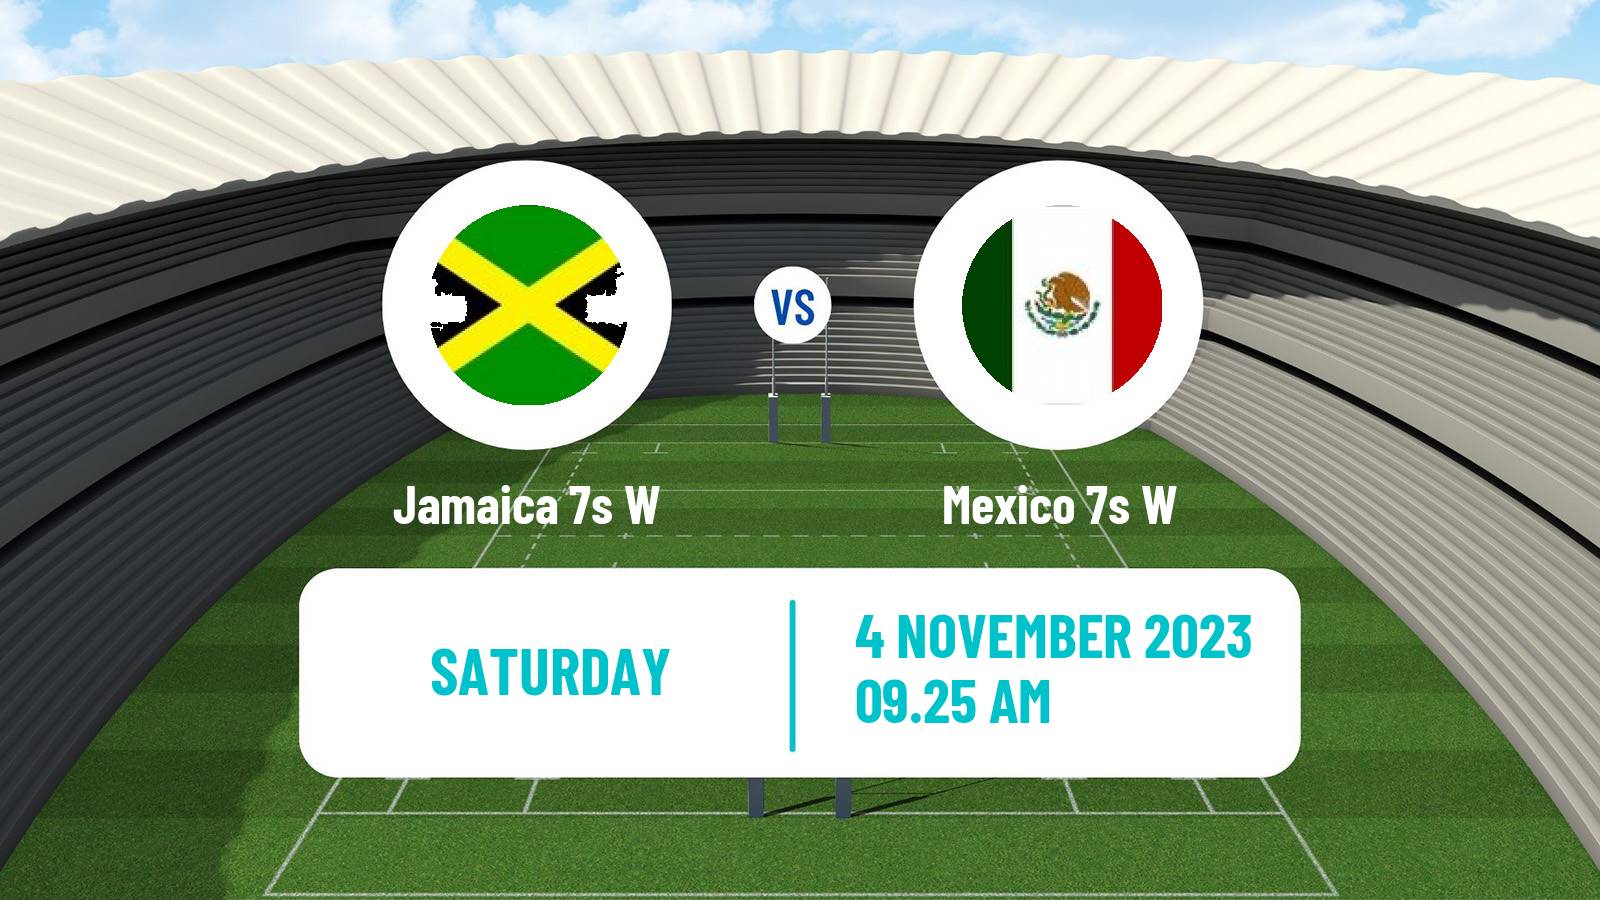 Rugby union Pan American 7s Rugby Women Jamaica 7s W - Mexico 7s W